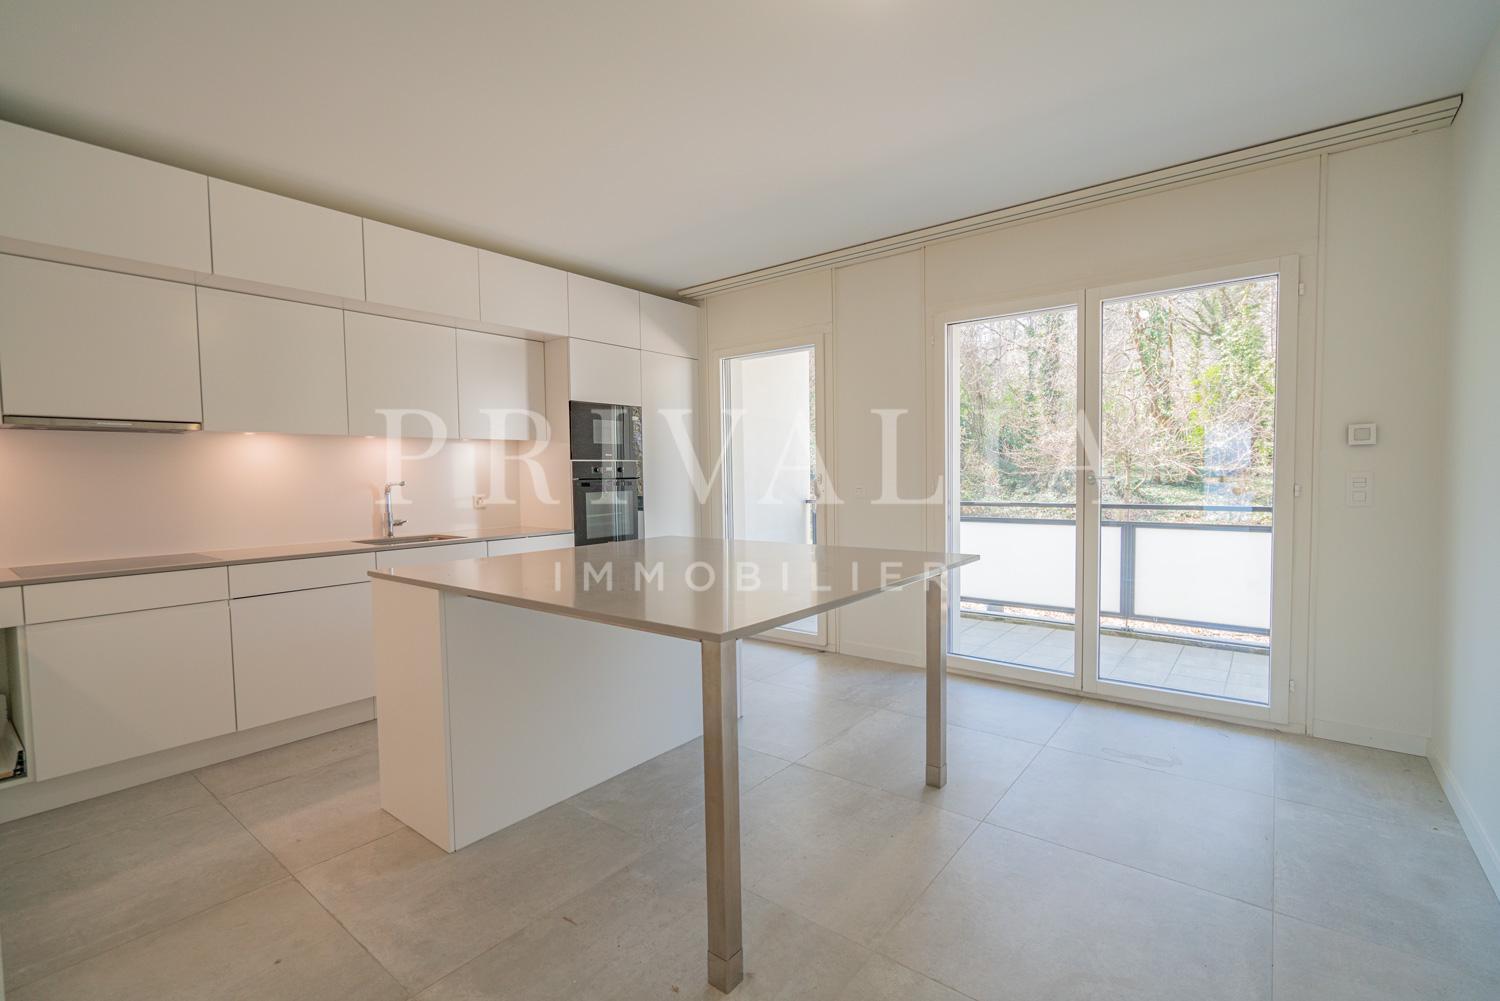 PrivaliaBeautiful 7.5 room flat on the 1st floor with 2 balconies in a secure residence